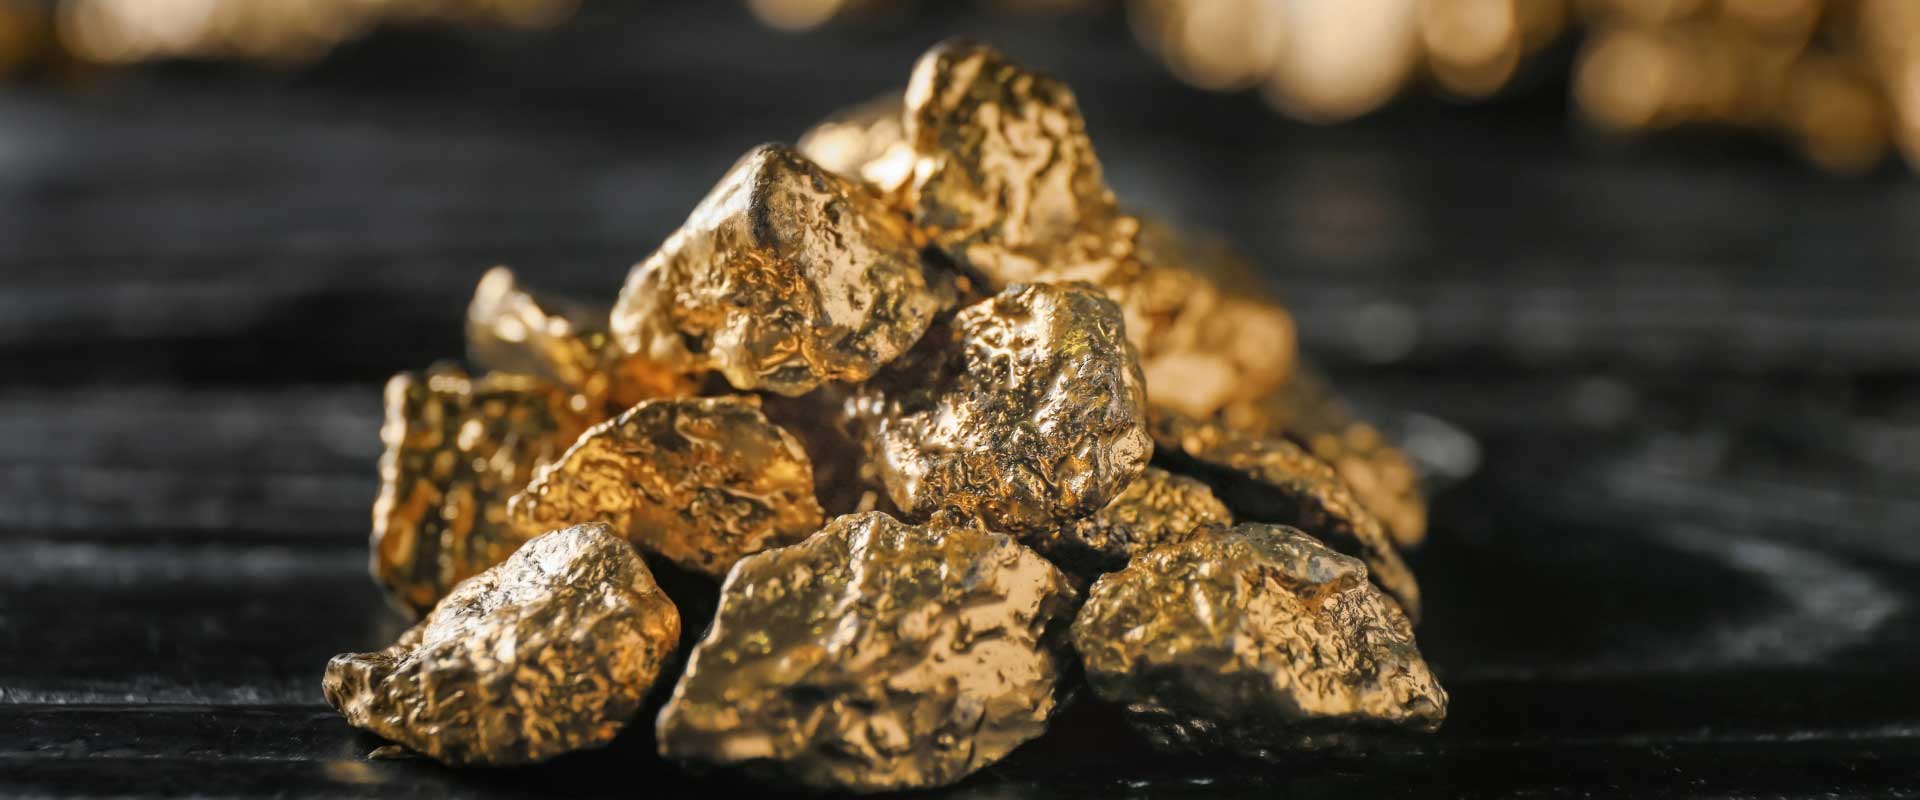 pile of gold nuggets on black surface